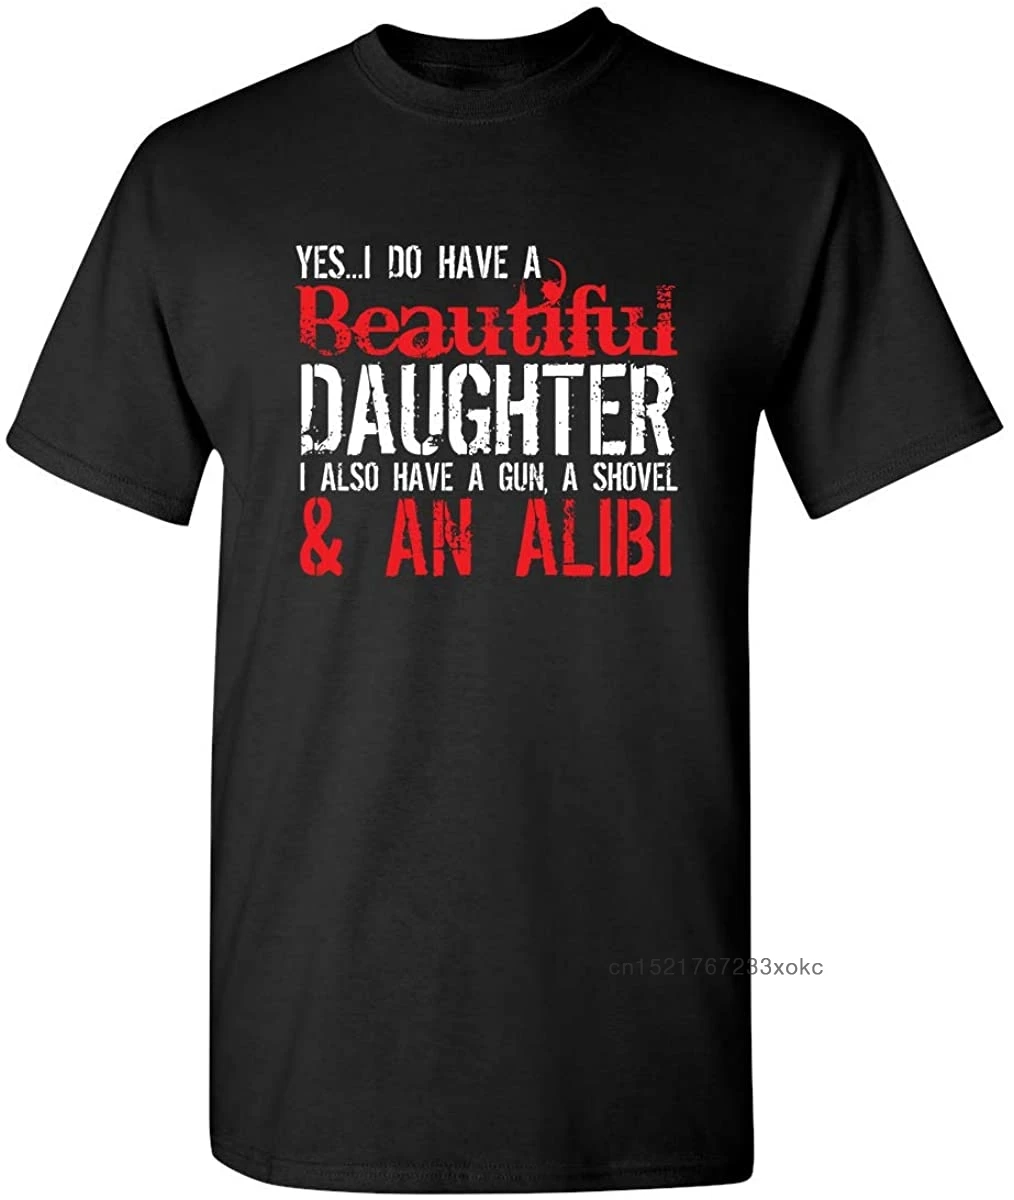 

Father Gift T-shirt Men Family Tees I Do Have A Beautiful Daughter Graphic Novelty Sarcastic Funny Saying T Shirt Cotton